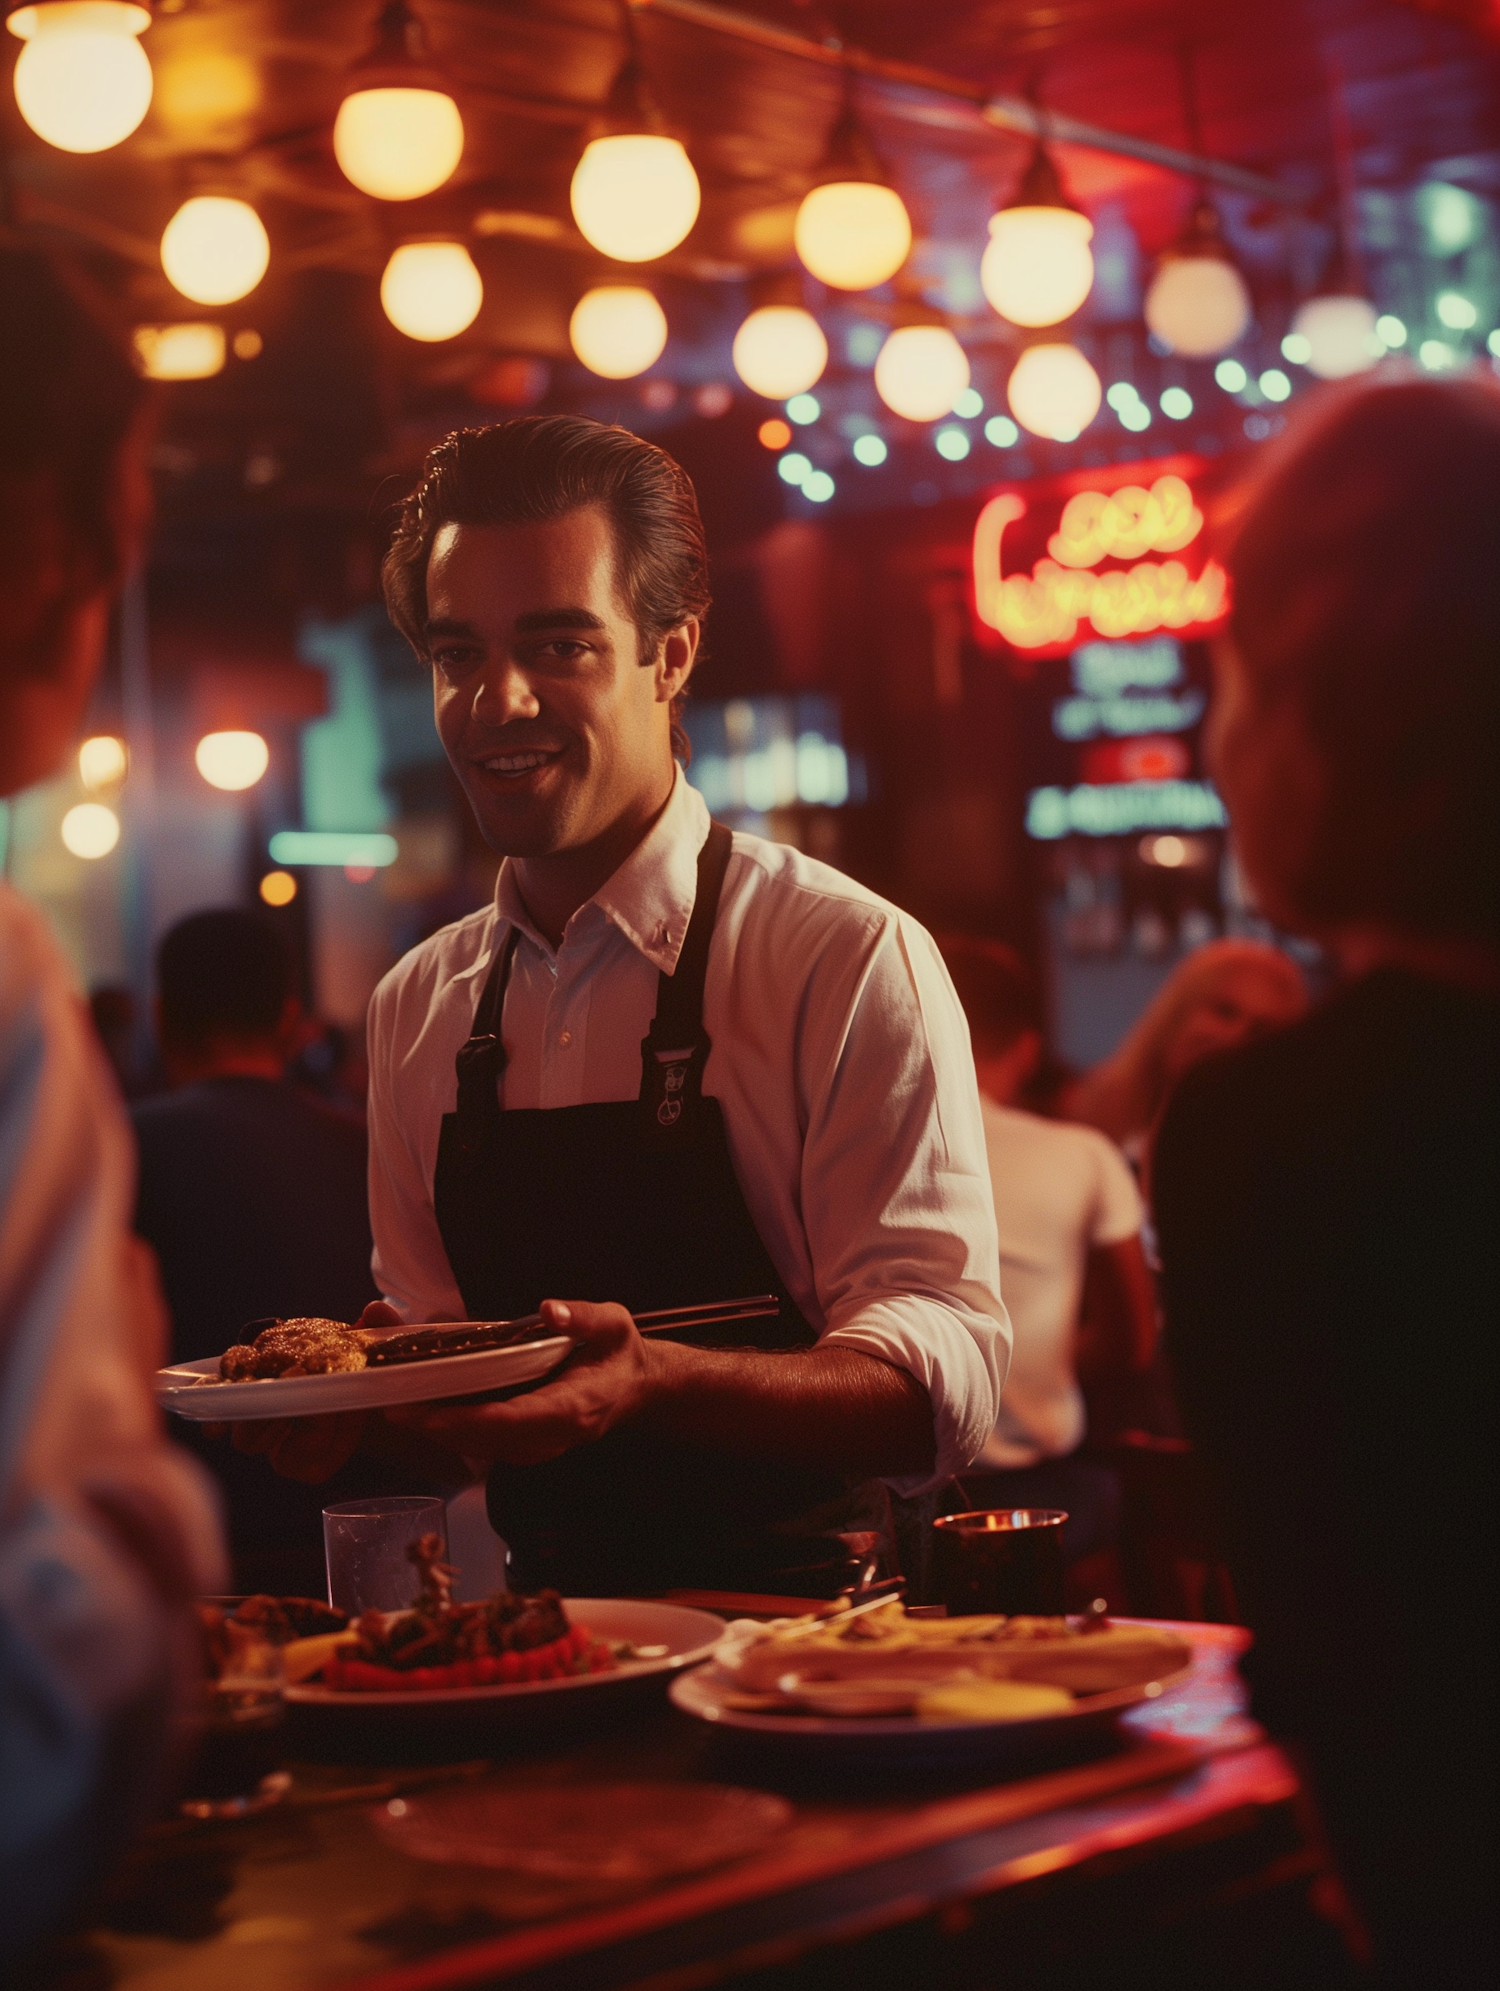 Friendly Professional Waiter in Cozy Dining Environment